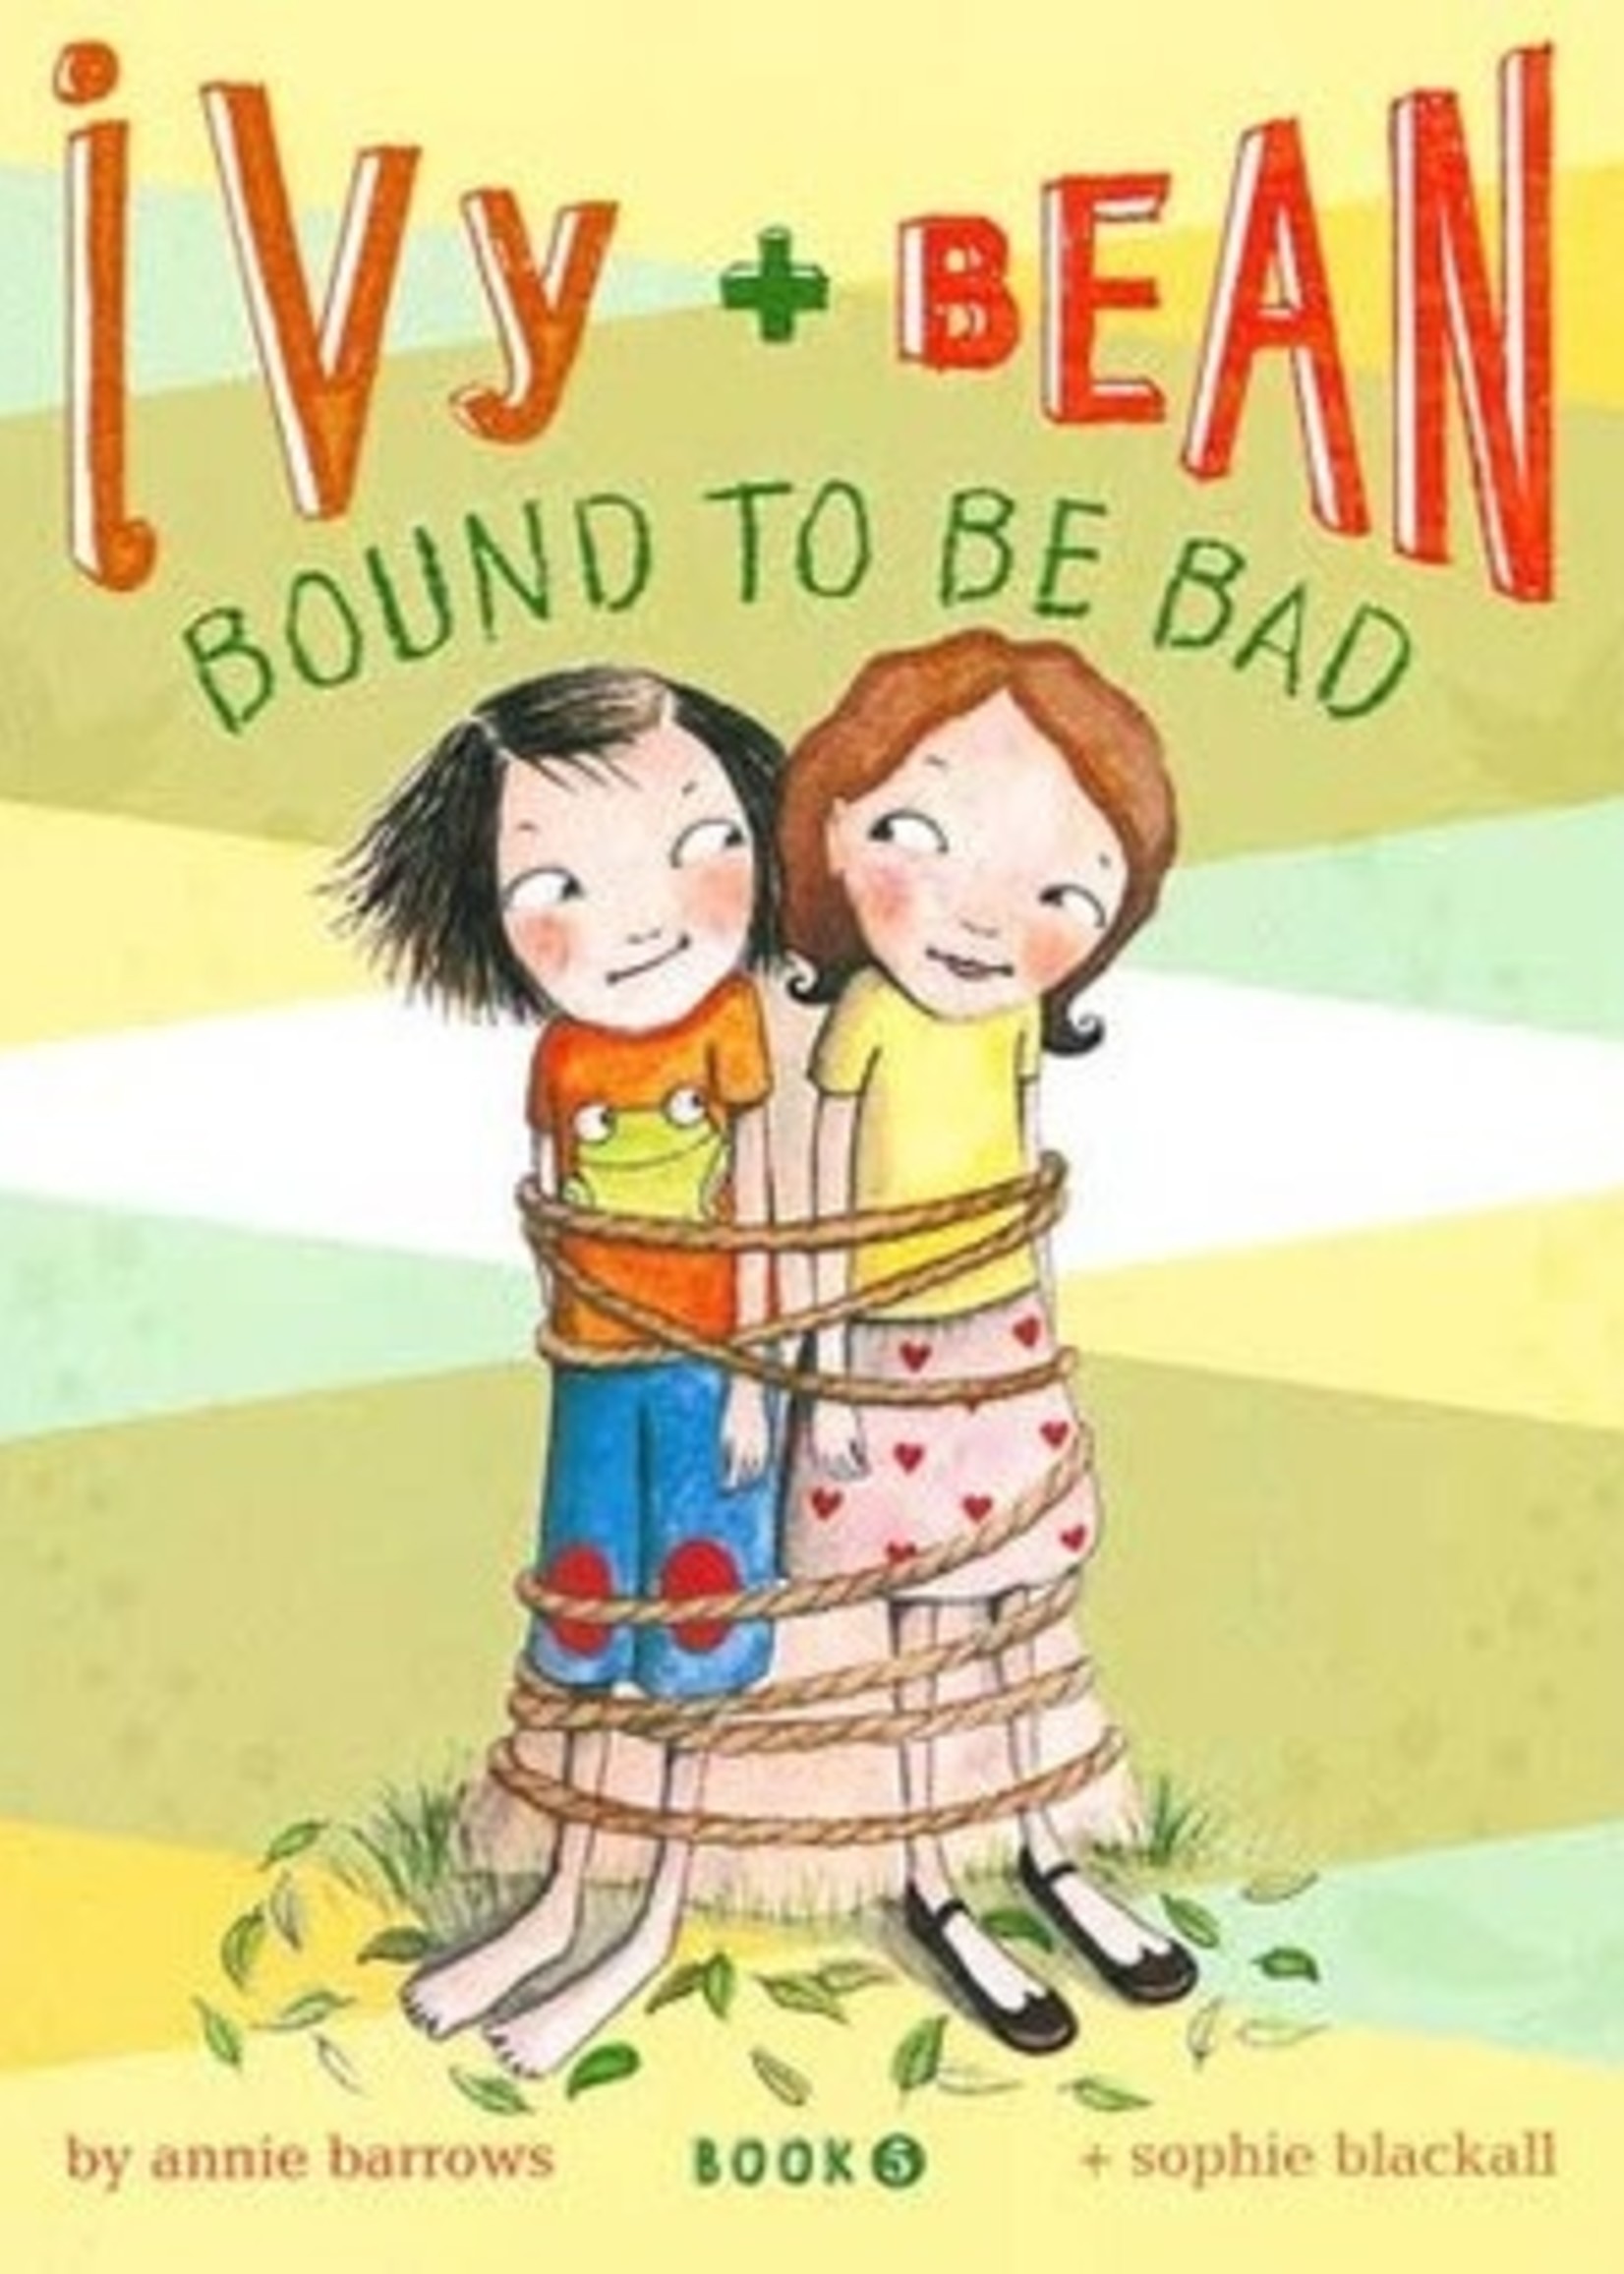 Bound to be Bad (Ivy and Bean #5) by Annie Barrows,  Sophie Blackall